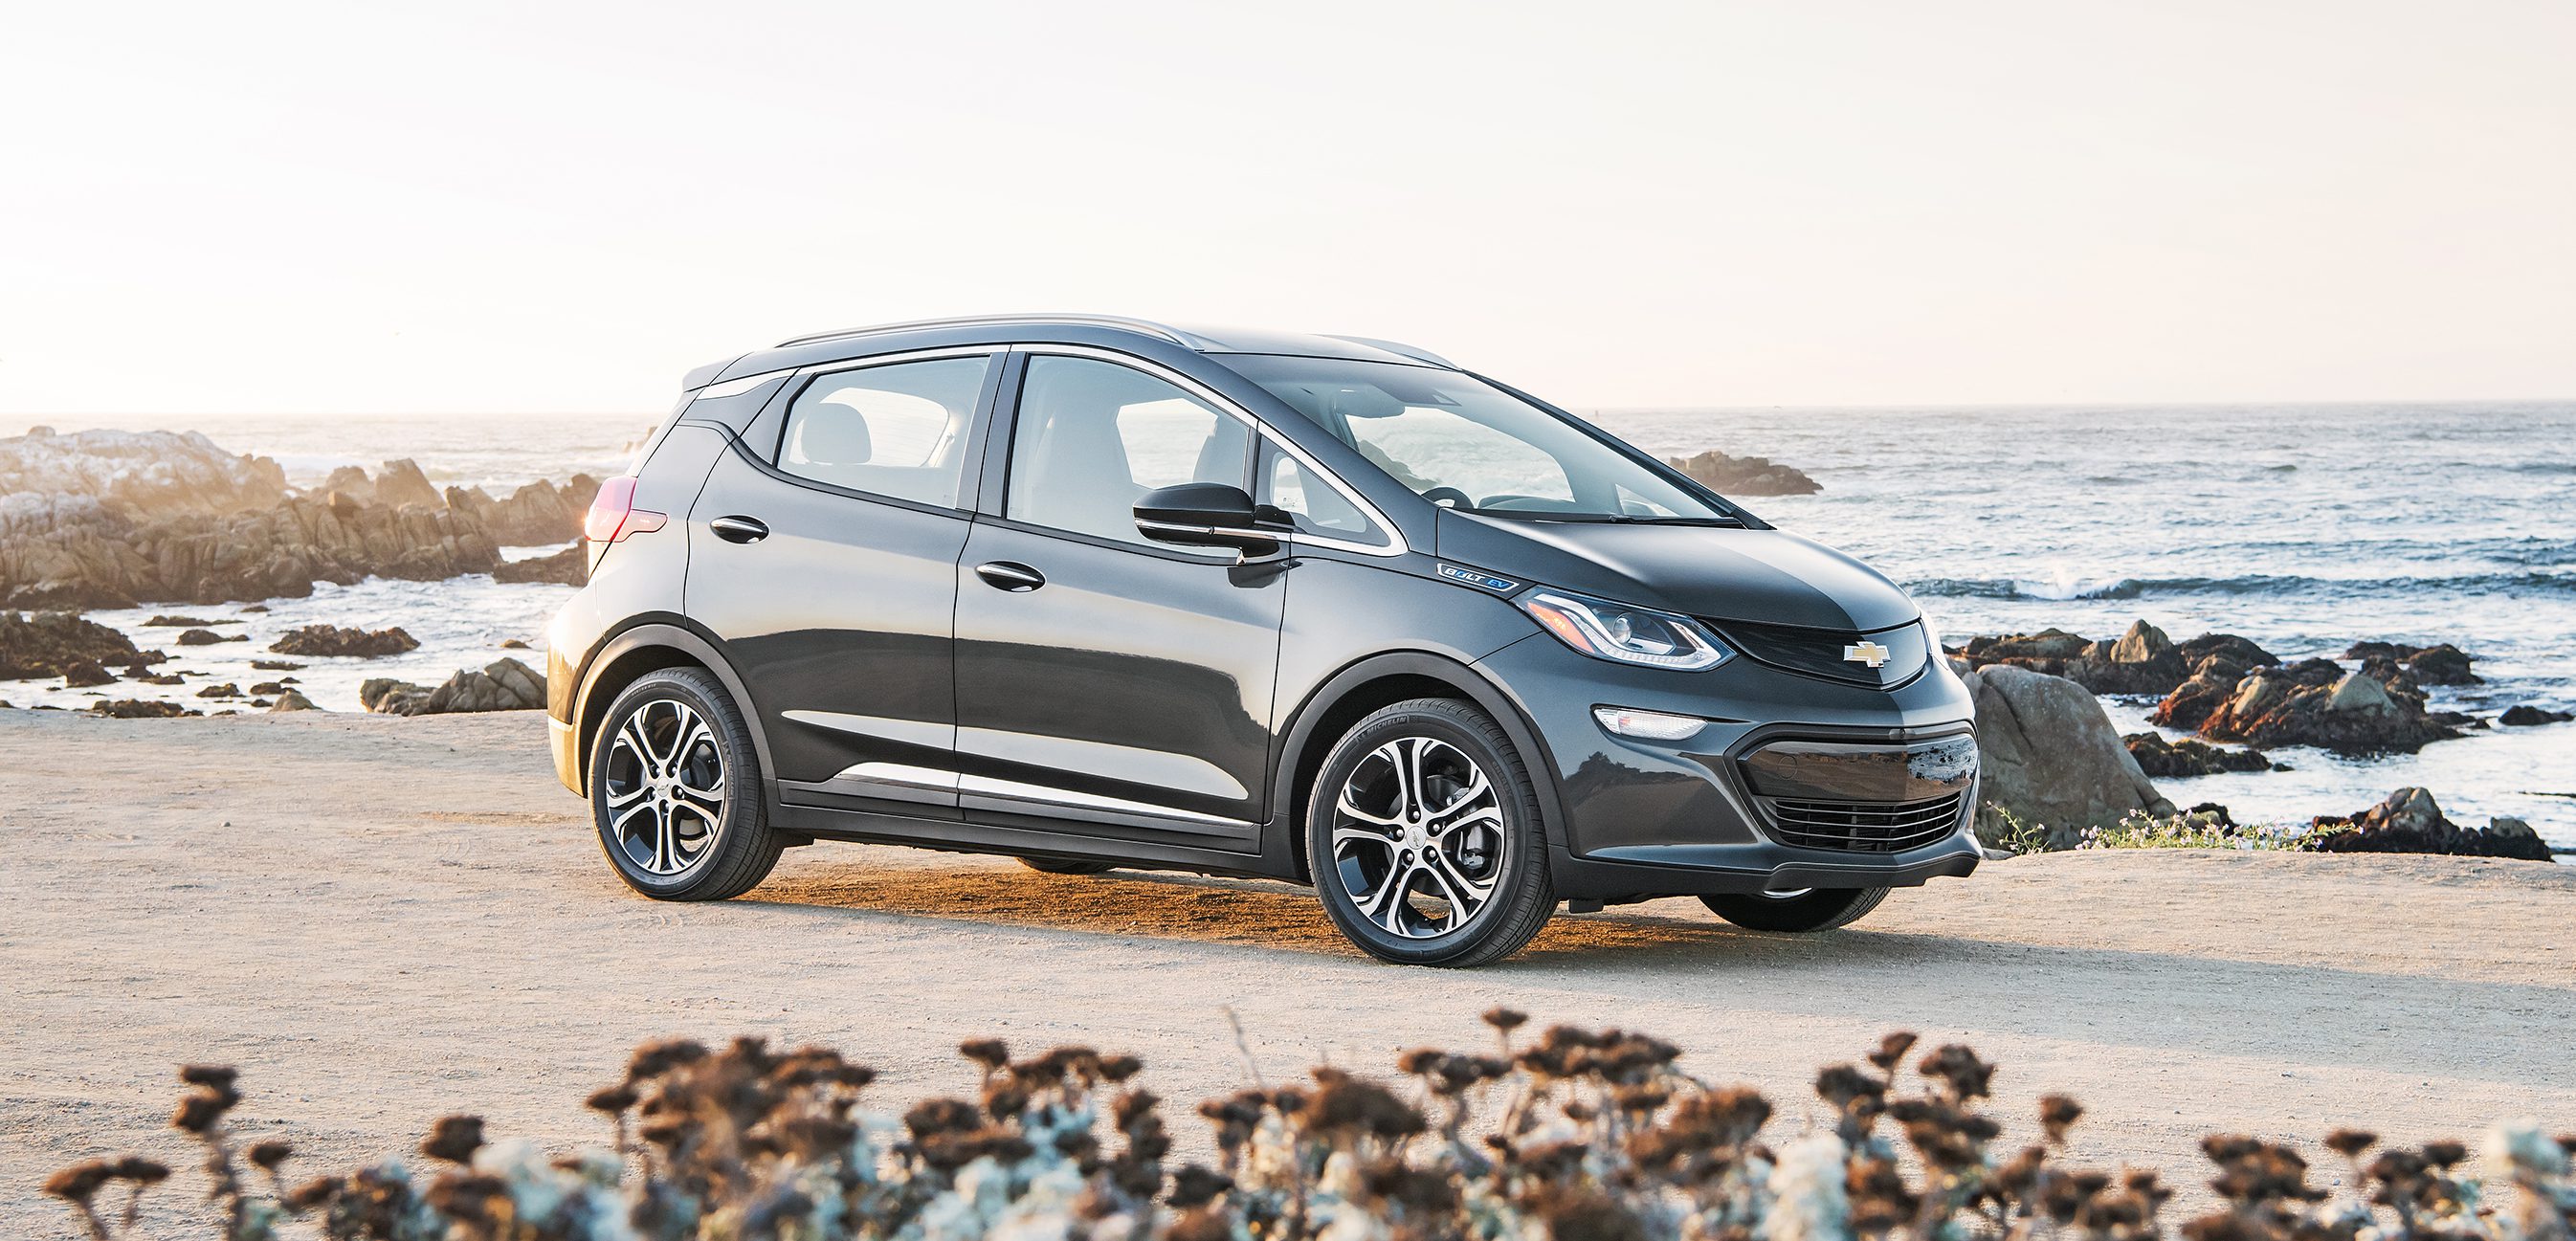 Chevy Bolt Ev Gm Confirms 750 Dc Fast Charging Option Reveals Two Trims Starting At 37 500 Msrp Electrek